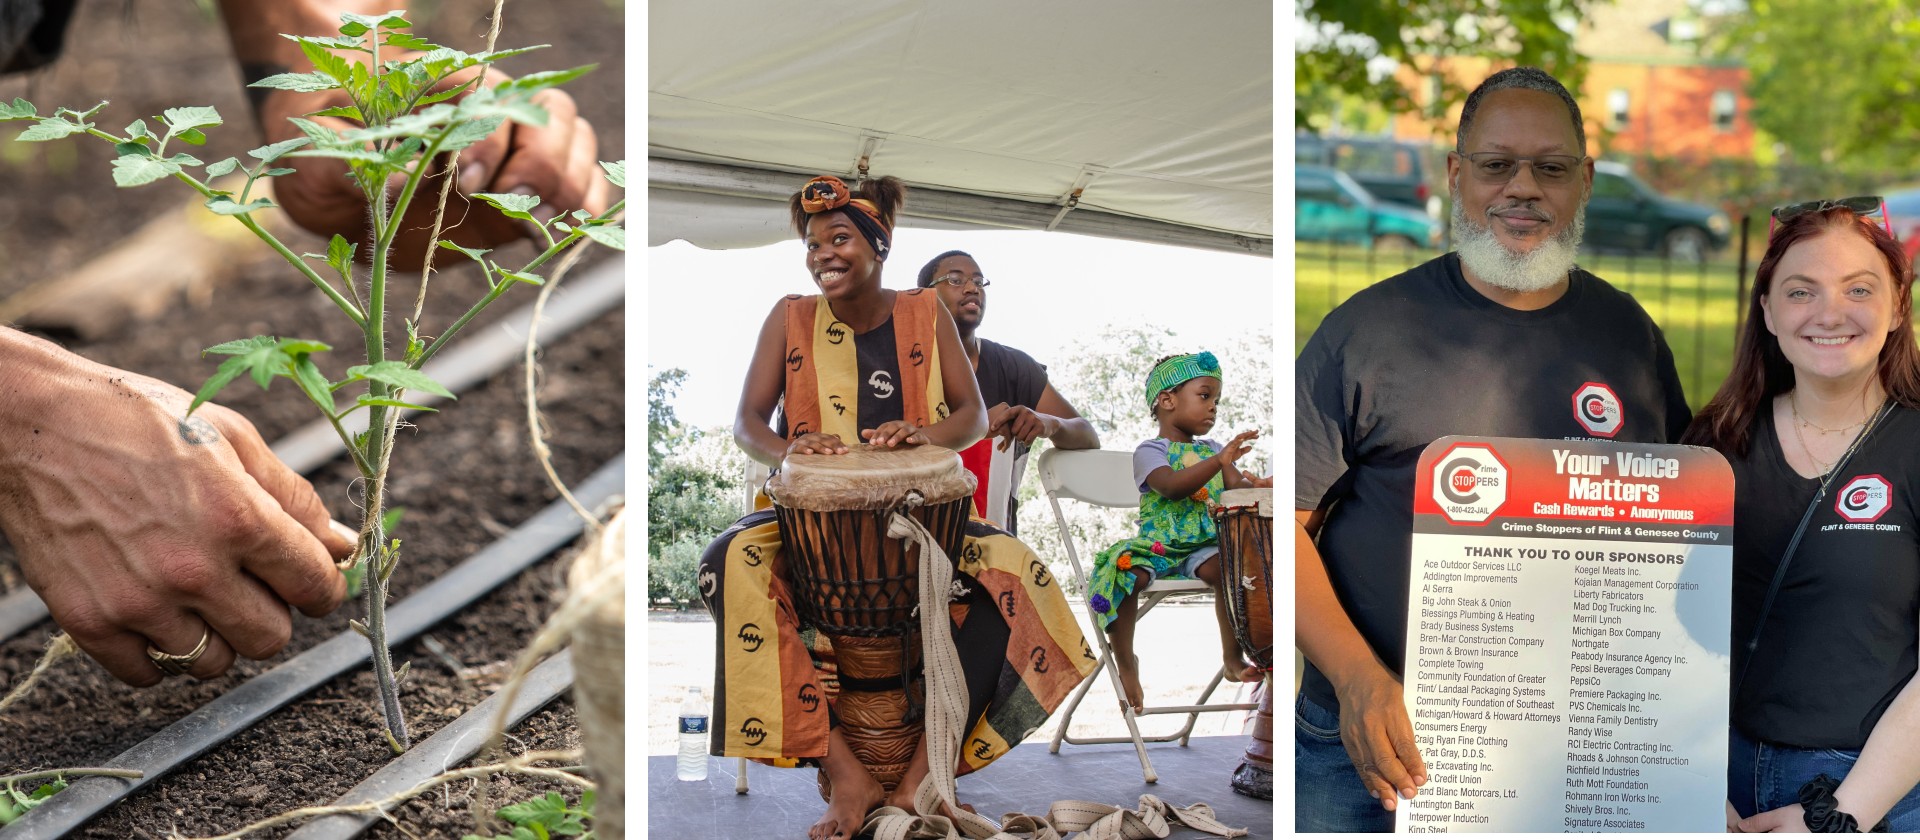 Triptych showing hands working in the Asbury Farms hoophouse, participants in Kuungana African Drum and Dance, and Crime Stoppers of Flint & Genesee County